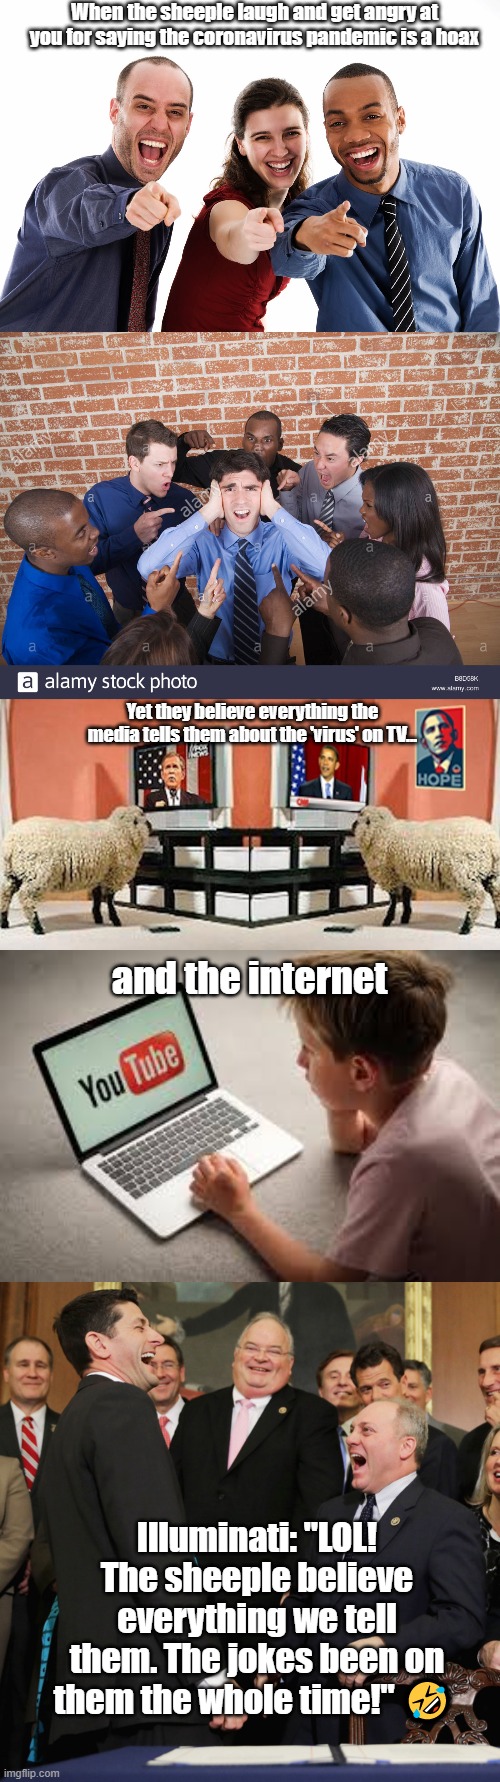 When the sheeple laugh and get angry at you for saying the coronavirus pandemic is a hoax; Yet they believe everything the media tells them about the 'virus' on TV... and the internet; Illuminati: "LOL! The sheeple believe everything we tell them. The jokes been on them the whole time!" 🤣 | image tagged in illuminati,coronavirus,hoax | made w/ Imgflip meme maker